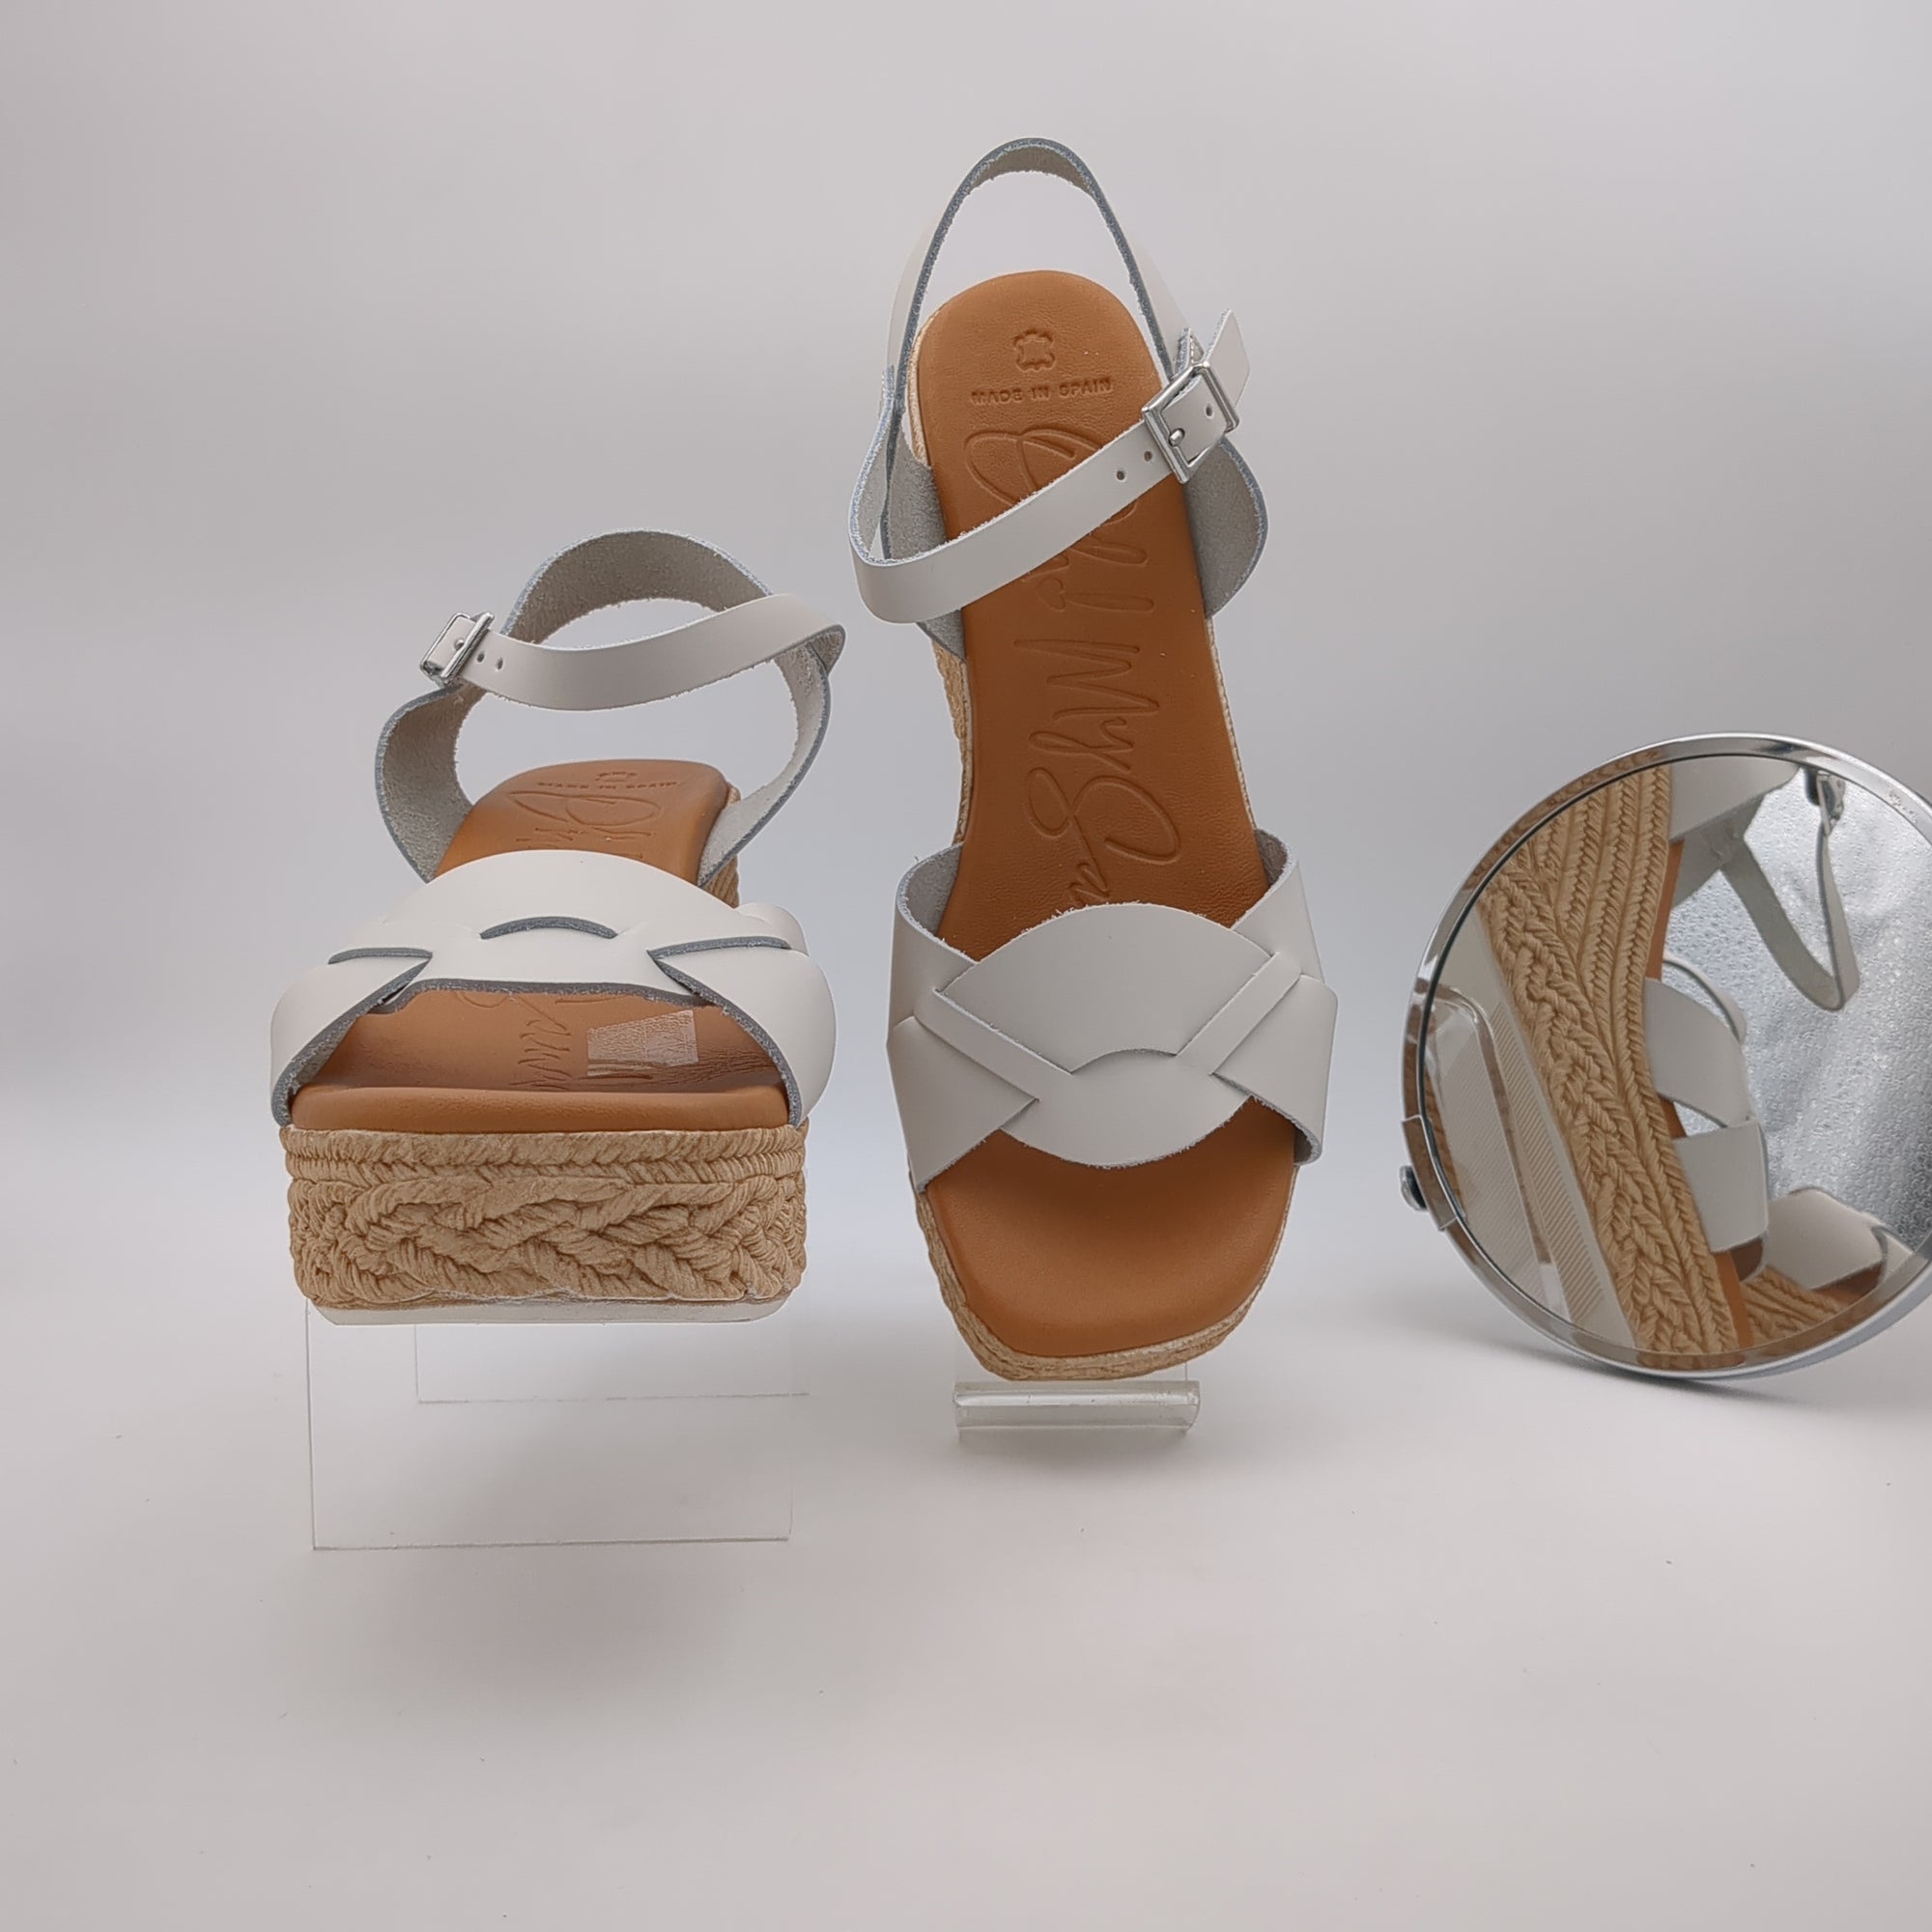 Oh My Sandals 5460 HIELO Cream Wedge Sandals with Memory Foam and Faux Rope Detail